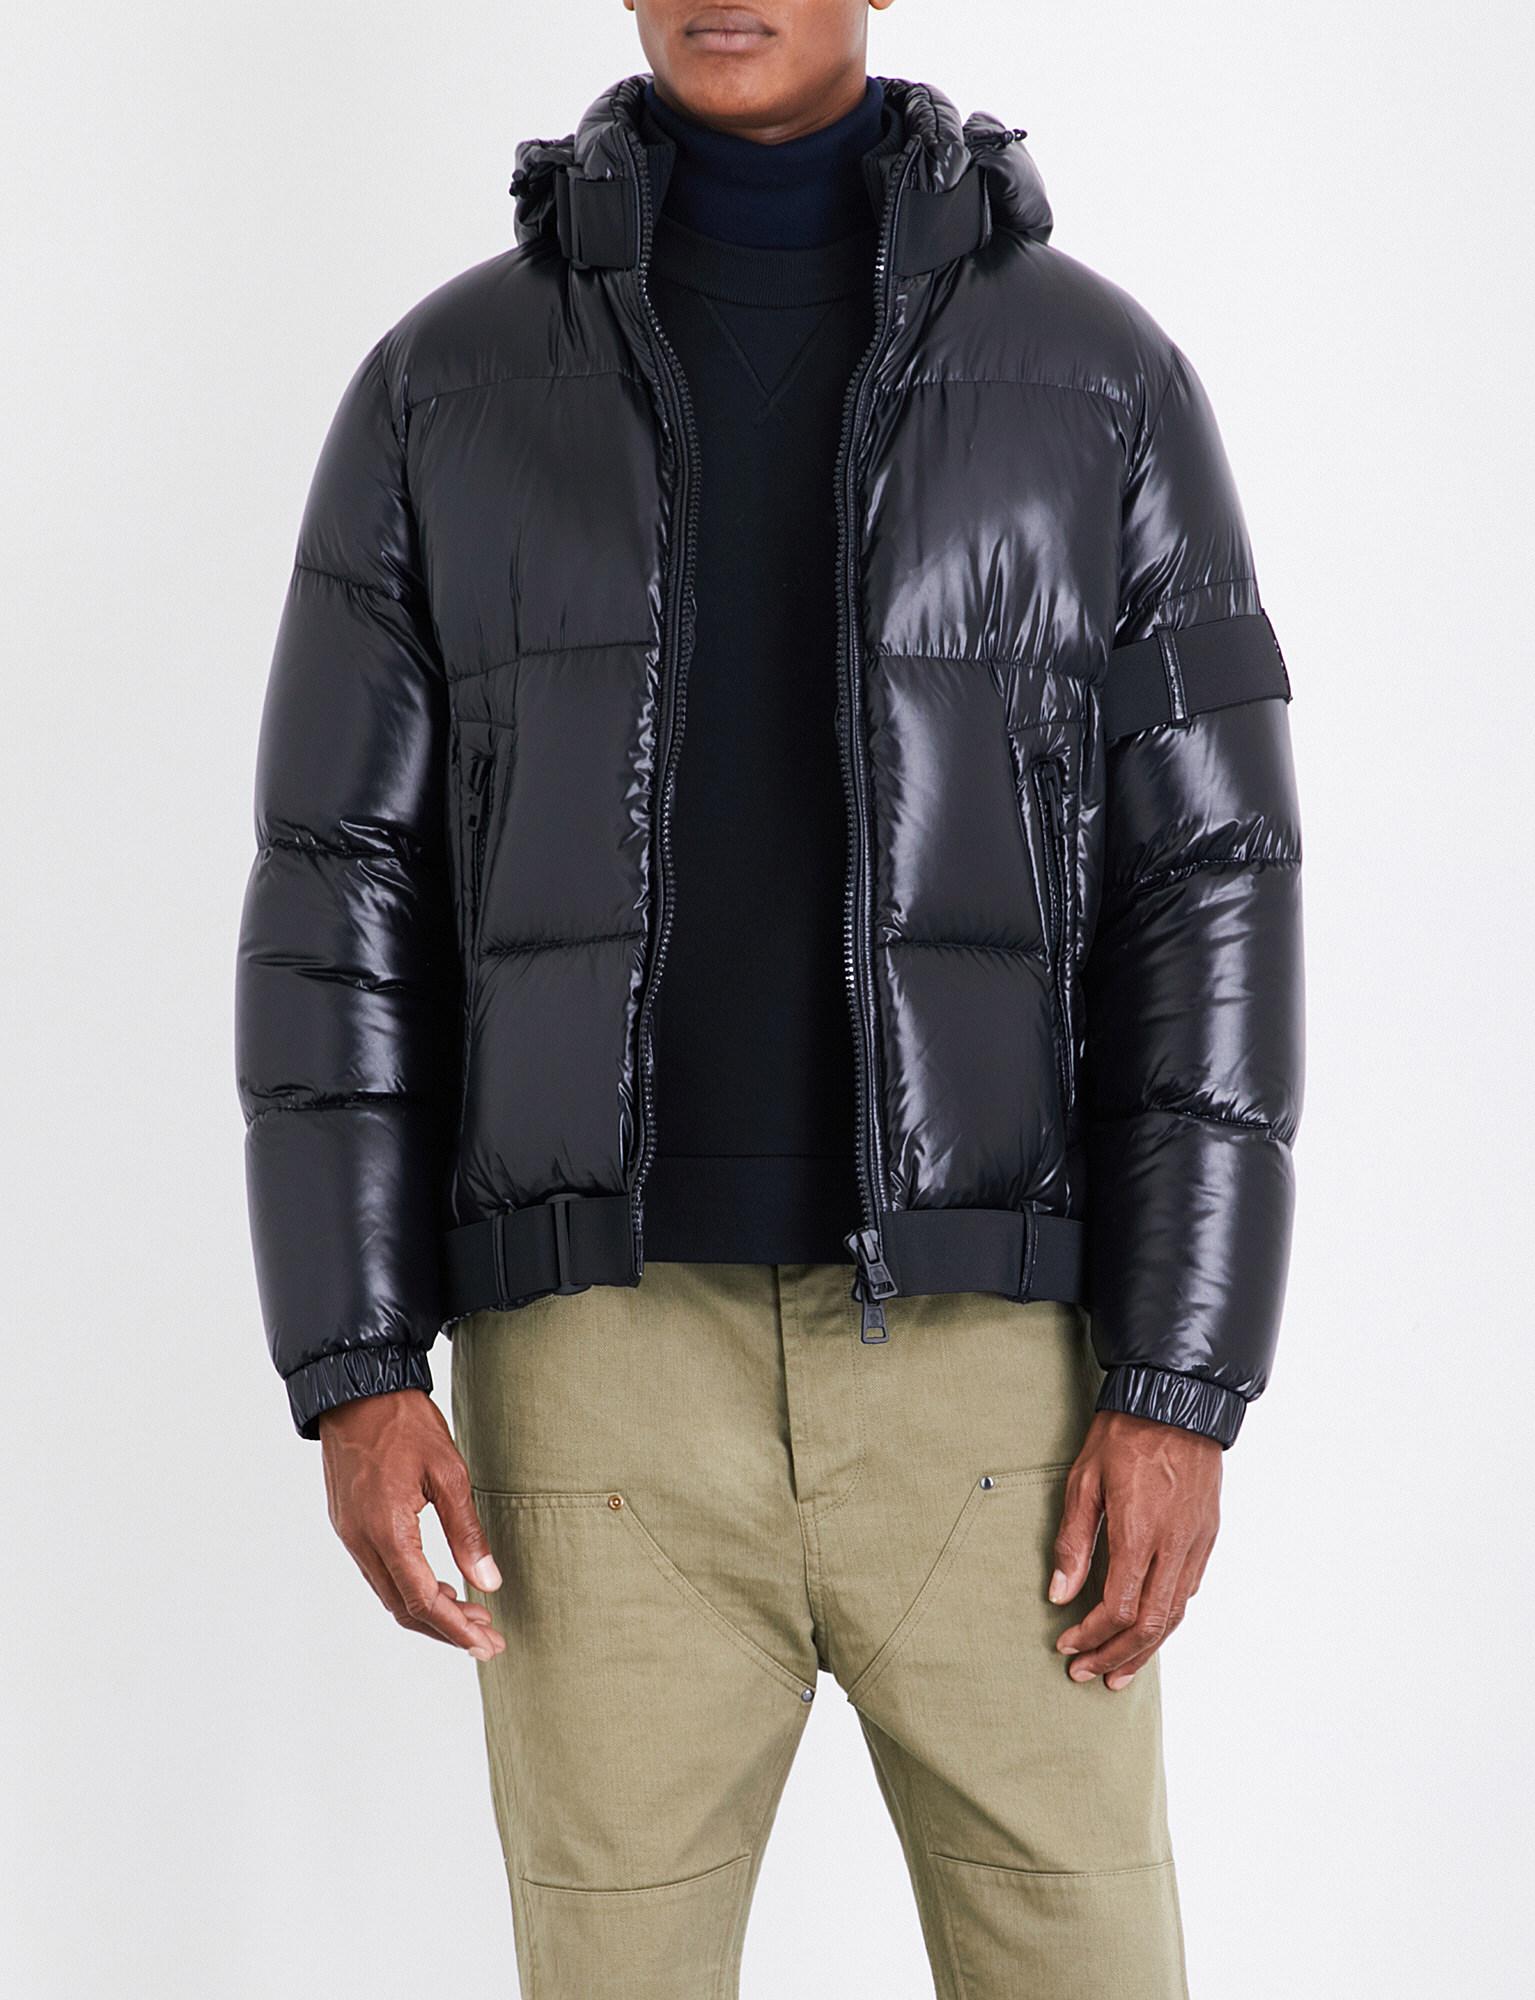 moncler craig green puffer,OFF 79%,www.concordehotels.com.tr